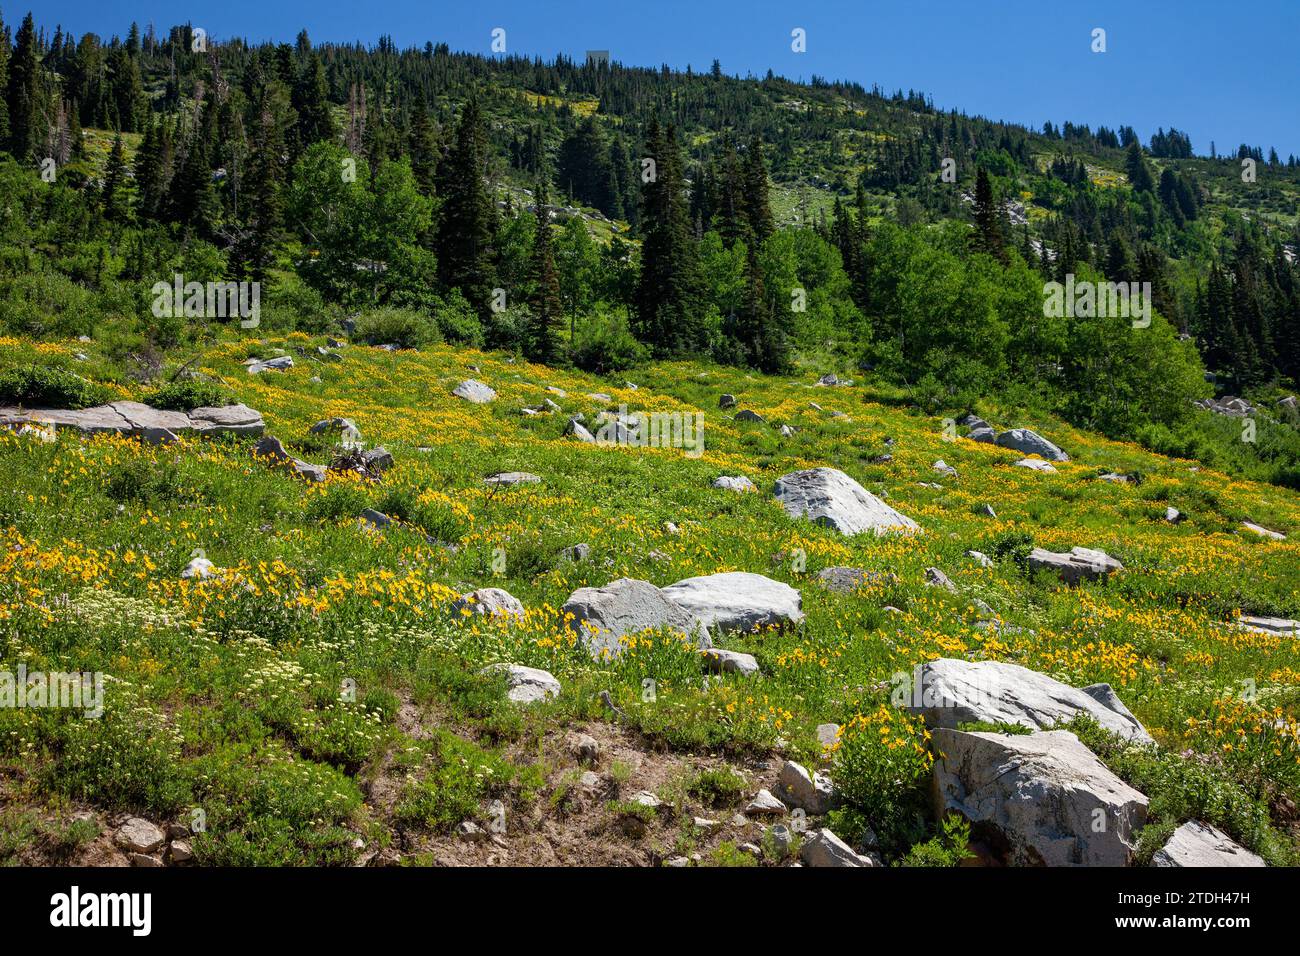 Summer wildflower bloom in Albion Basin in Little Cottonwood Canyon by Salt Lake City, Utah. Stock Photo